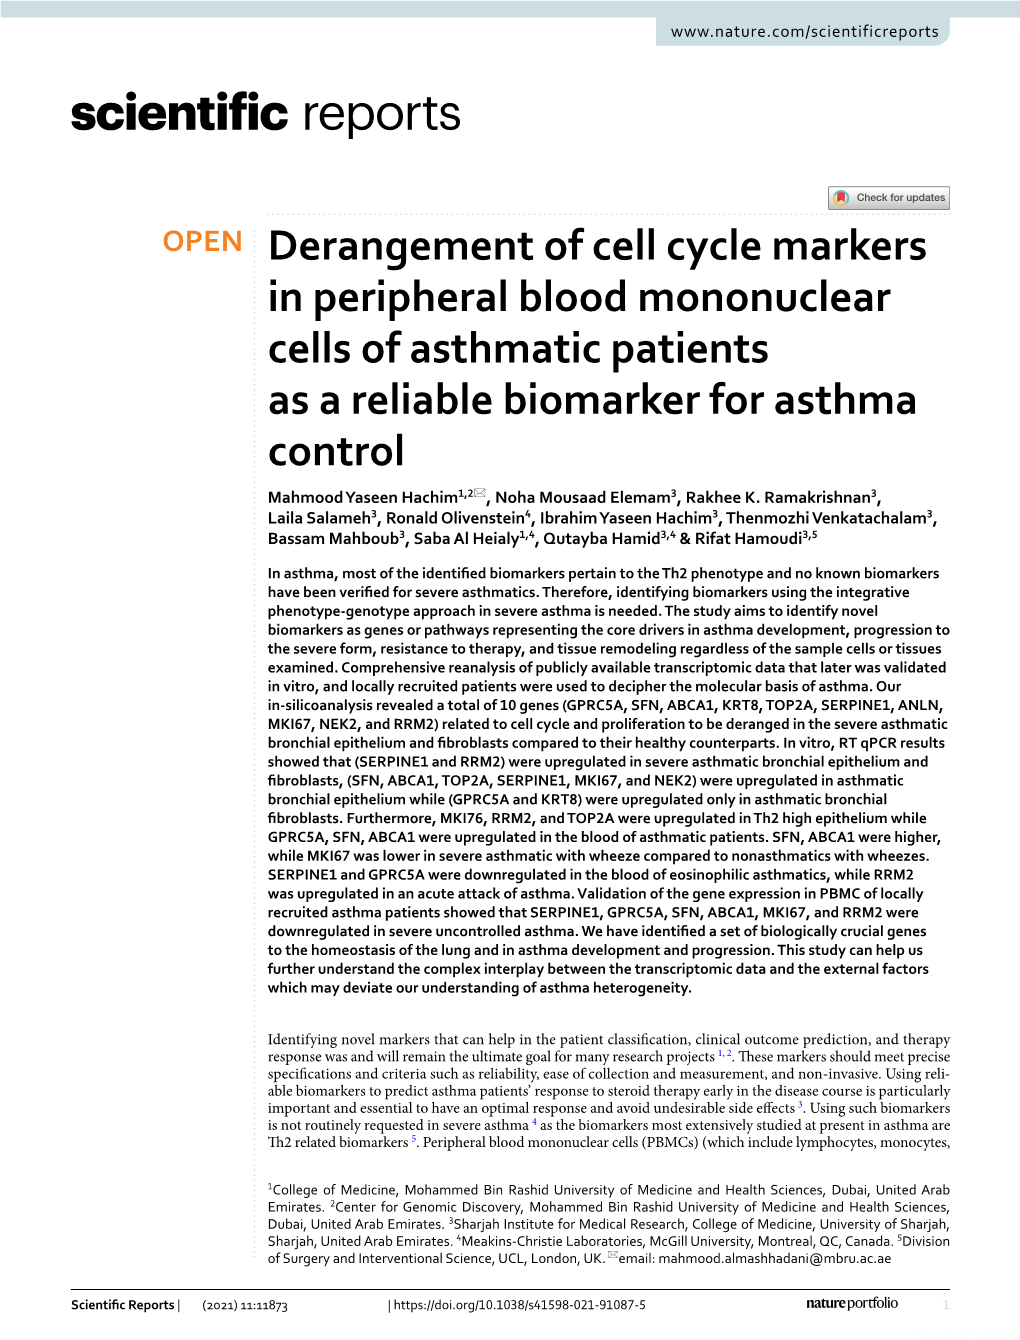 Derangement of Cell Cycle Markers in Peripheral Blood Mononuclear Cells